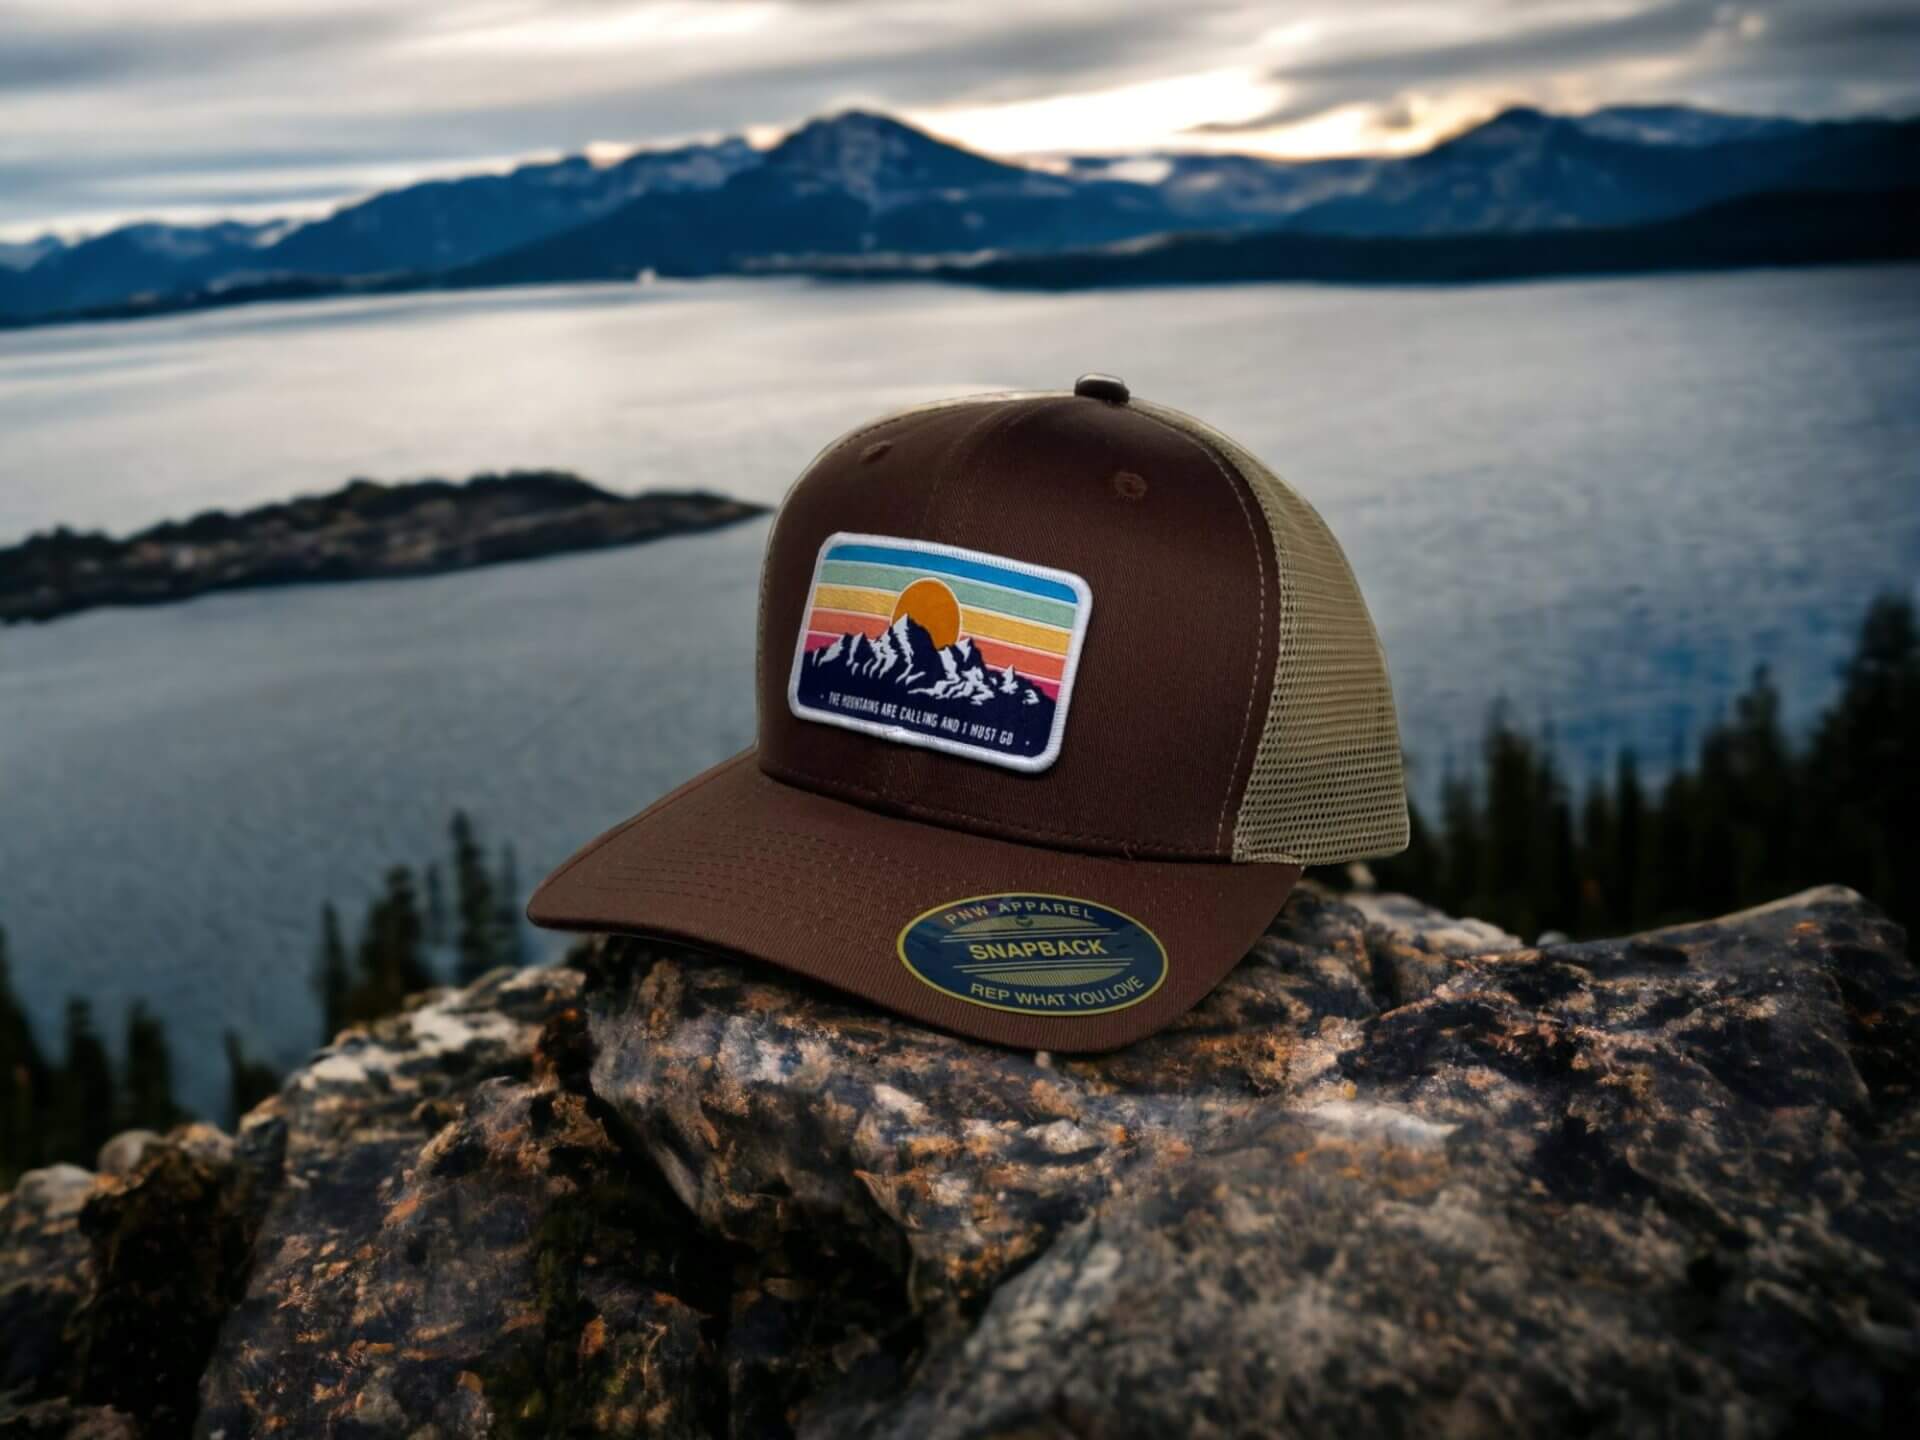 Mountains Trucker Hat with Vintage Style Patch - PNW Apparel